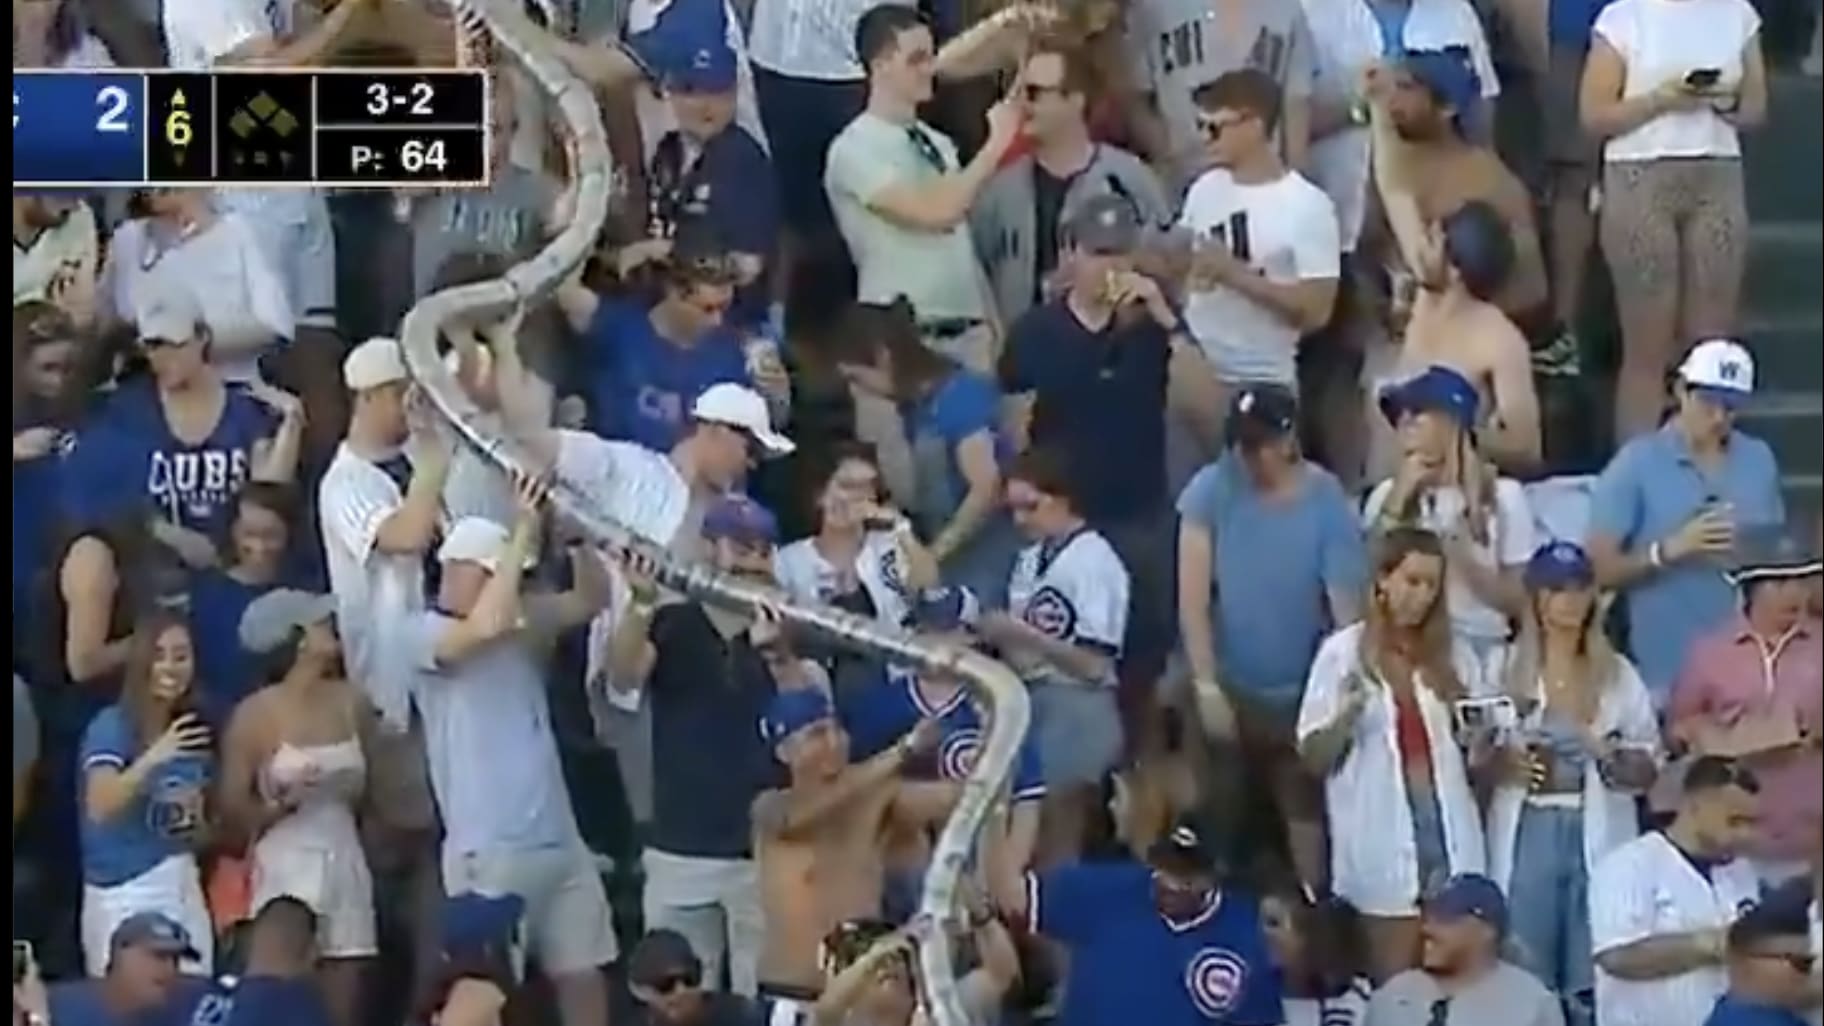 VIDEO: Cubs Beer Snake Makes its Return With Wrigley Field Back at Full Capacity